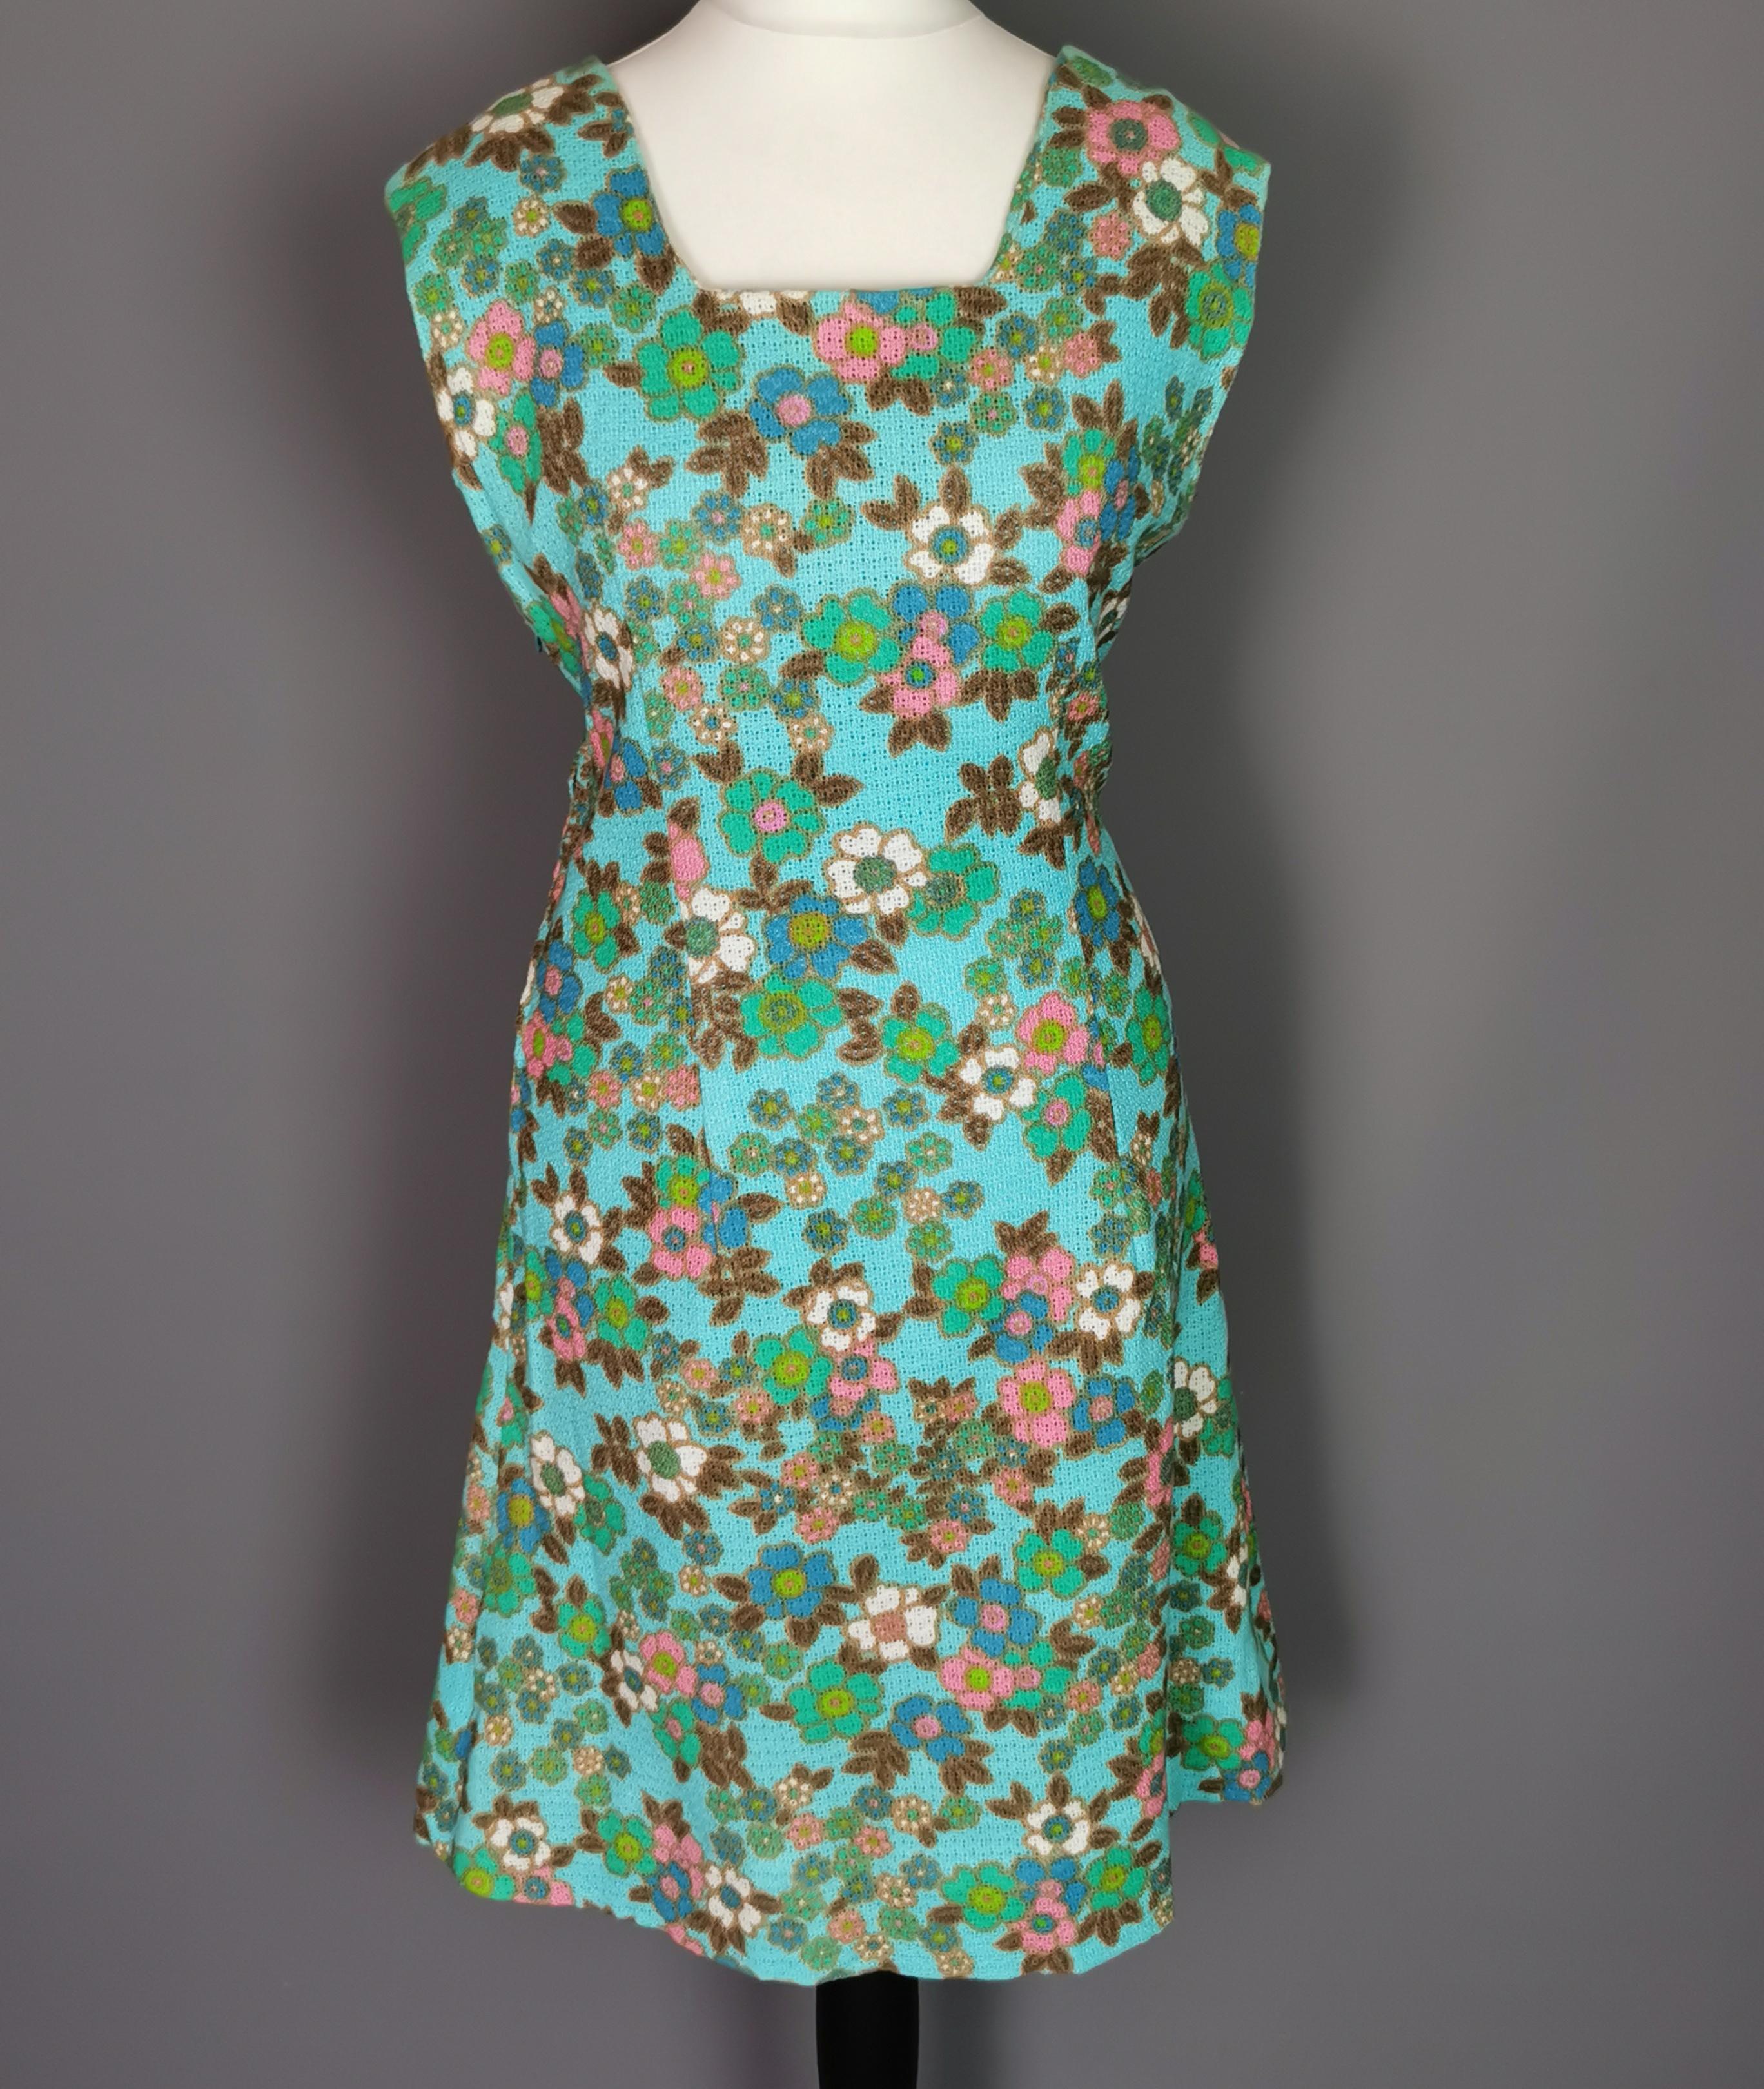 A fantastic vintage late c1960s flower power print mini dress!

It is made from a thick wool blend, nipped in very slightly at the waist with a fairly straight cut skirt in a vibrant floral pattern on a turquoise green ground, very colourful.

It